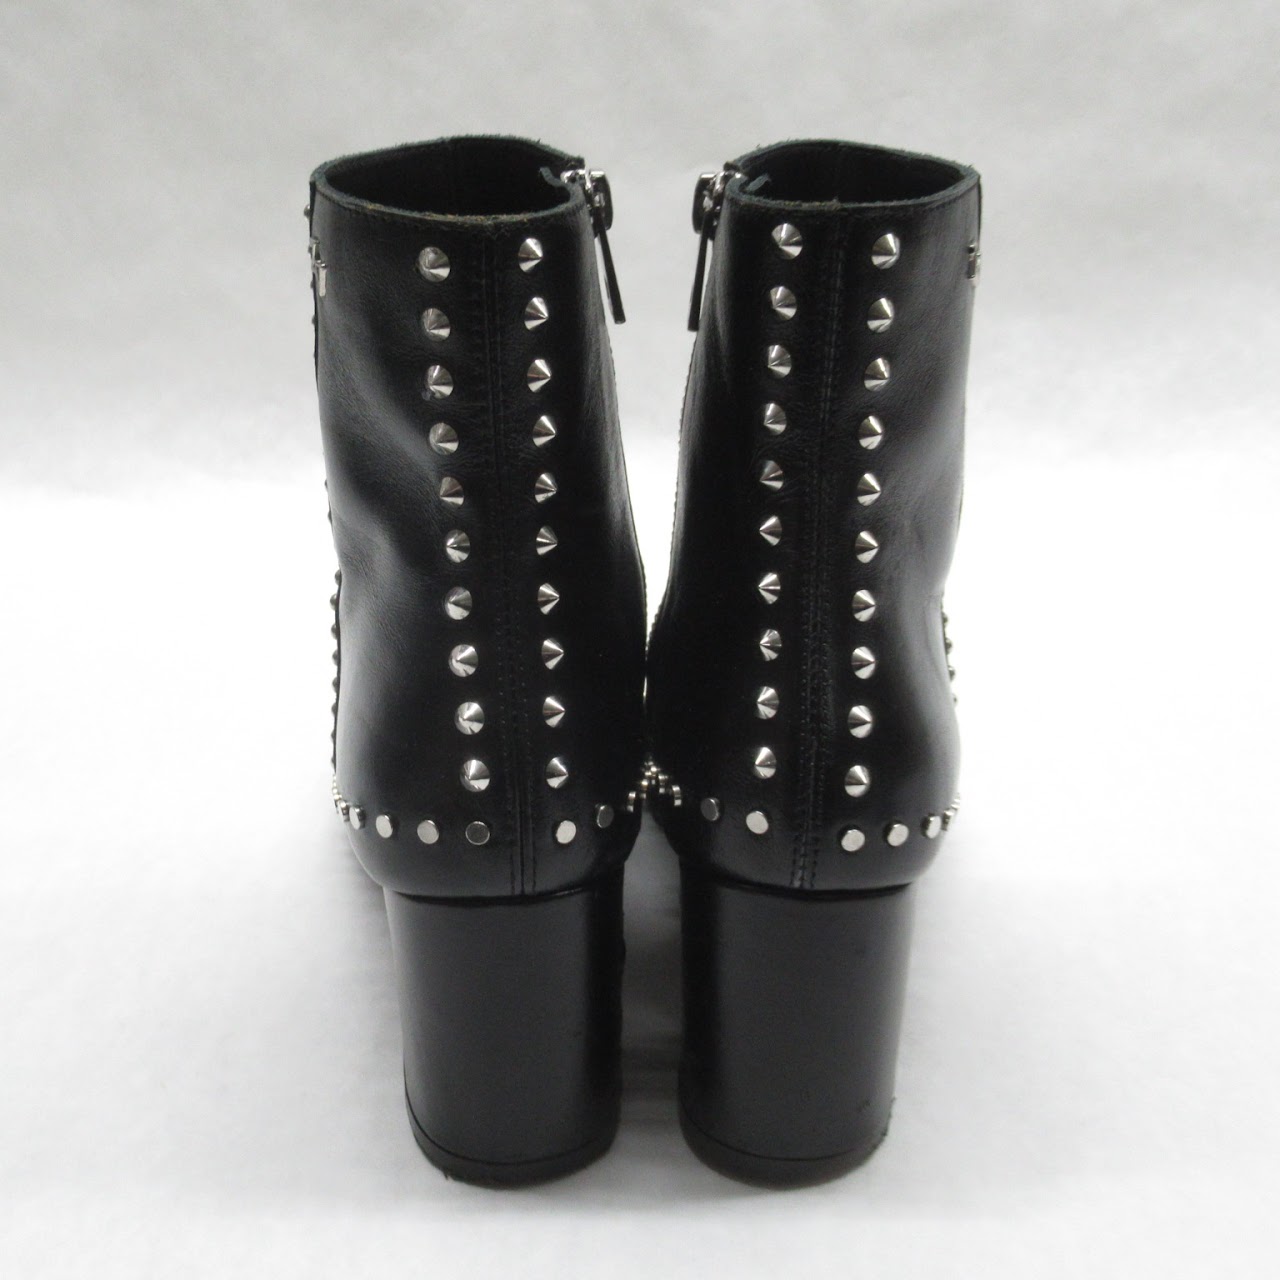 violation Make it heavy Emotion Zadig & Voltaire Studded Ankle Boots